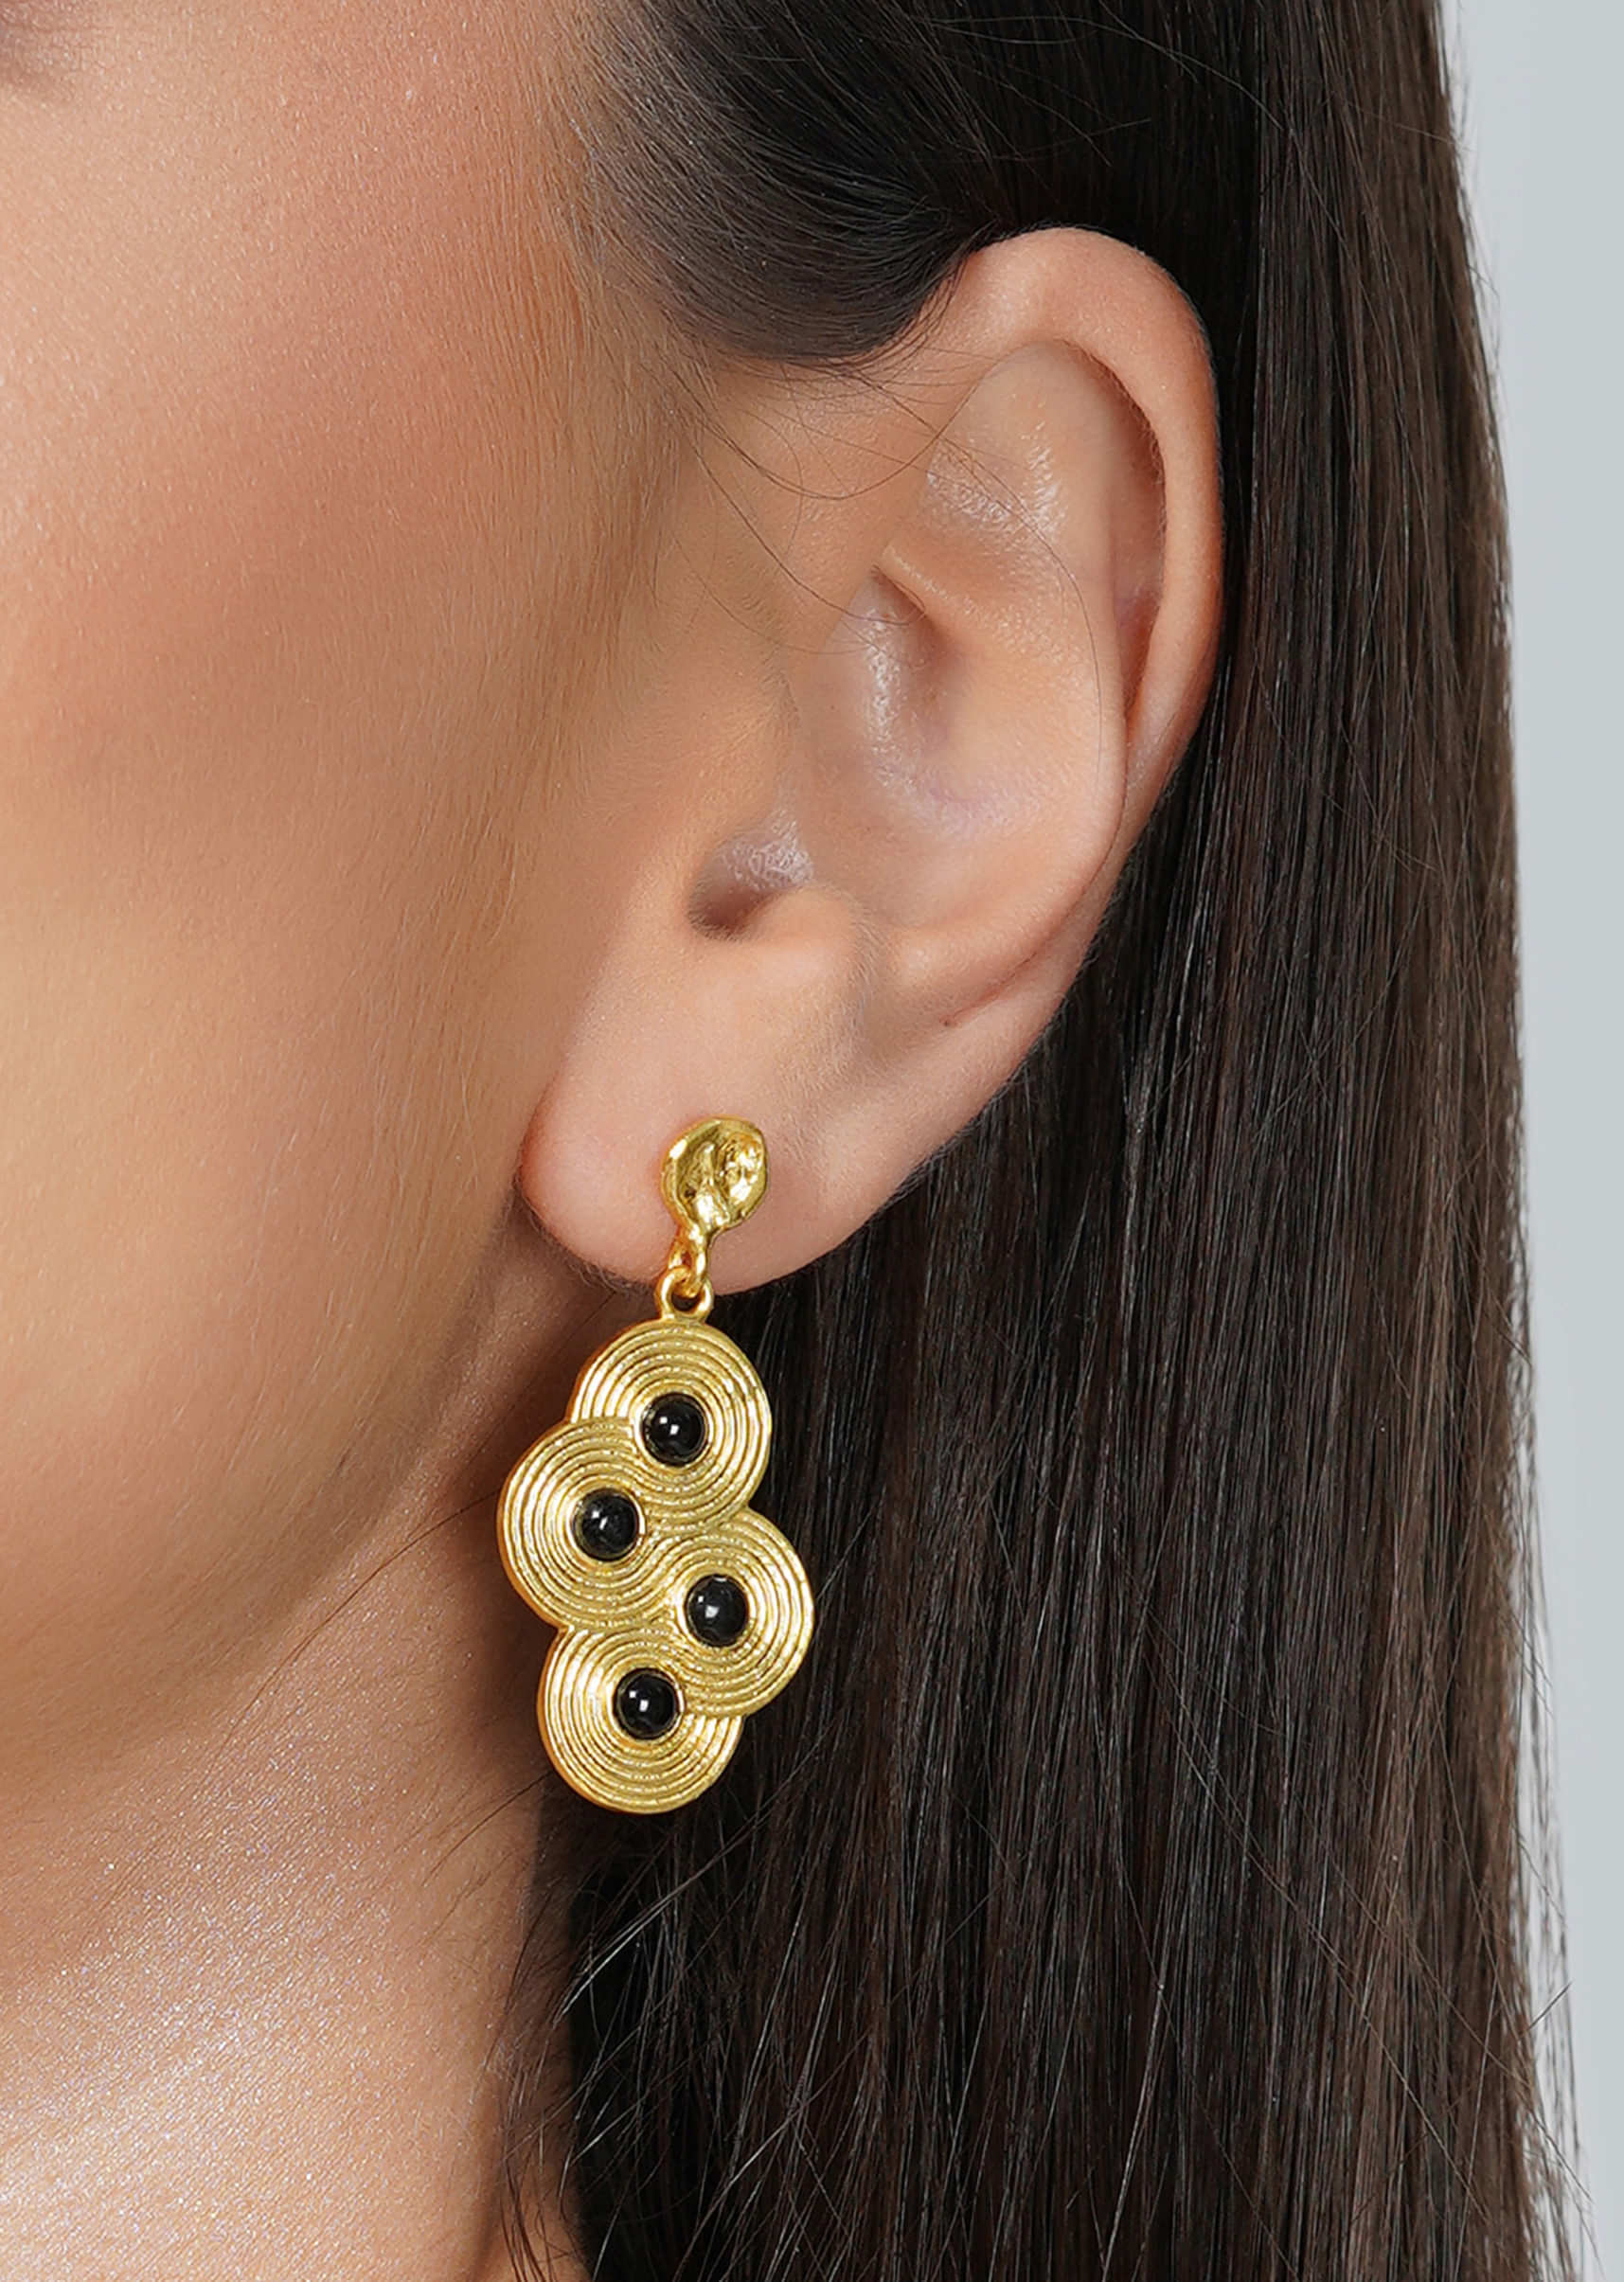 Gold Plated Designer Earrings Studded With Onyx Stones